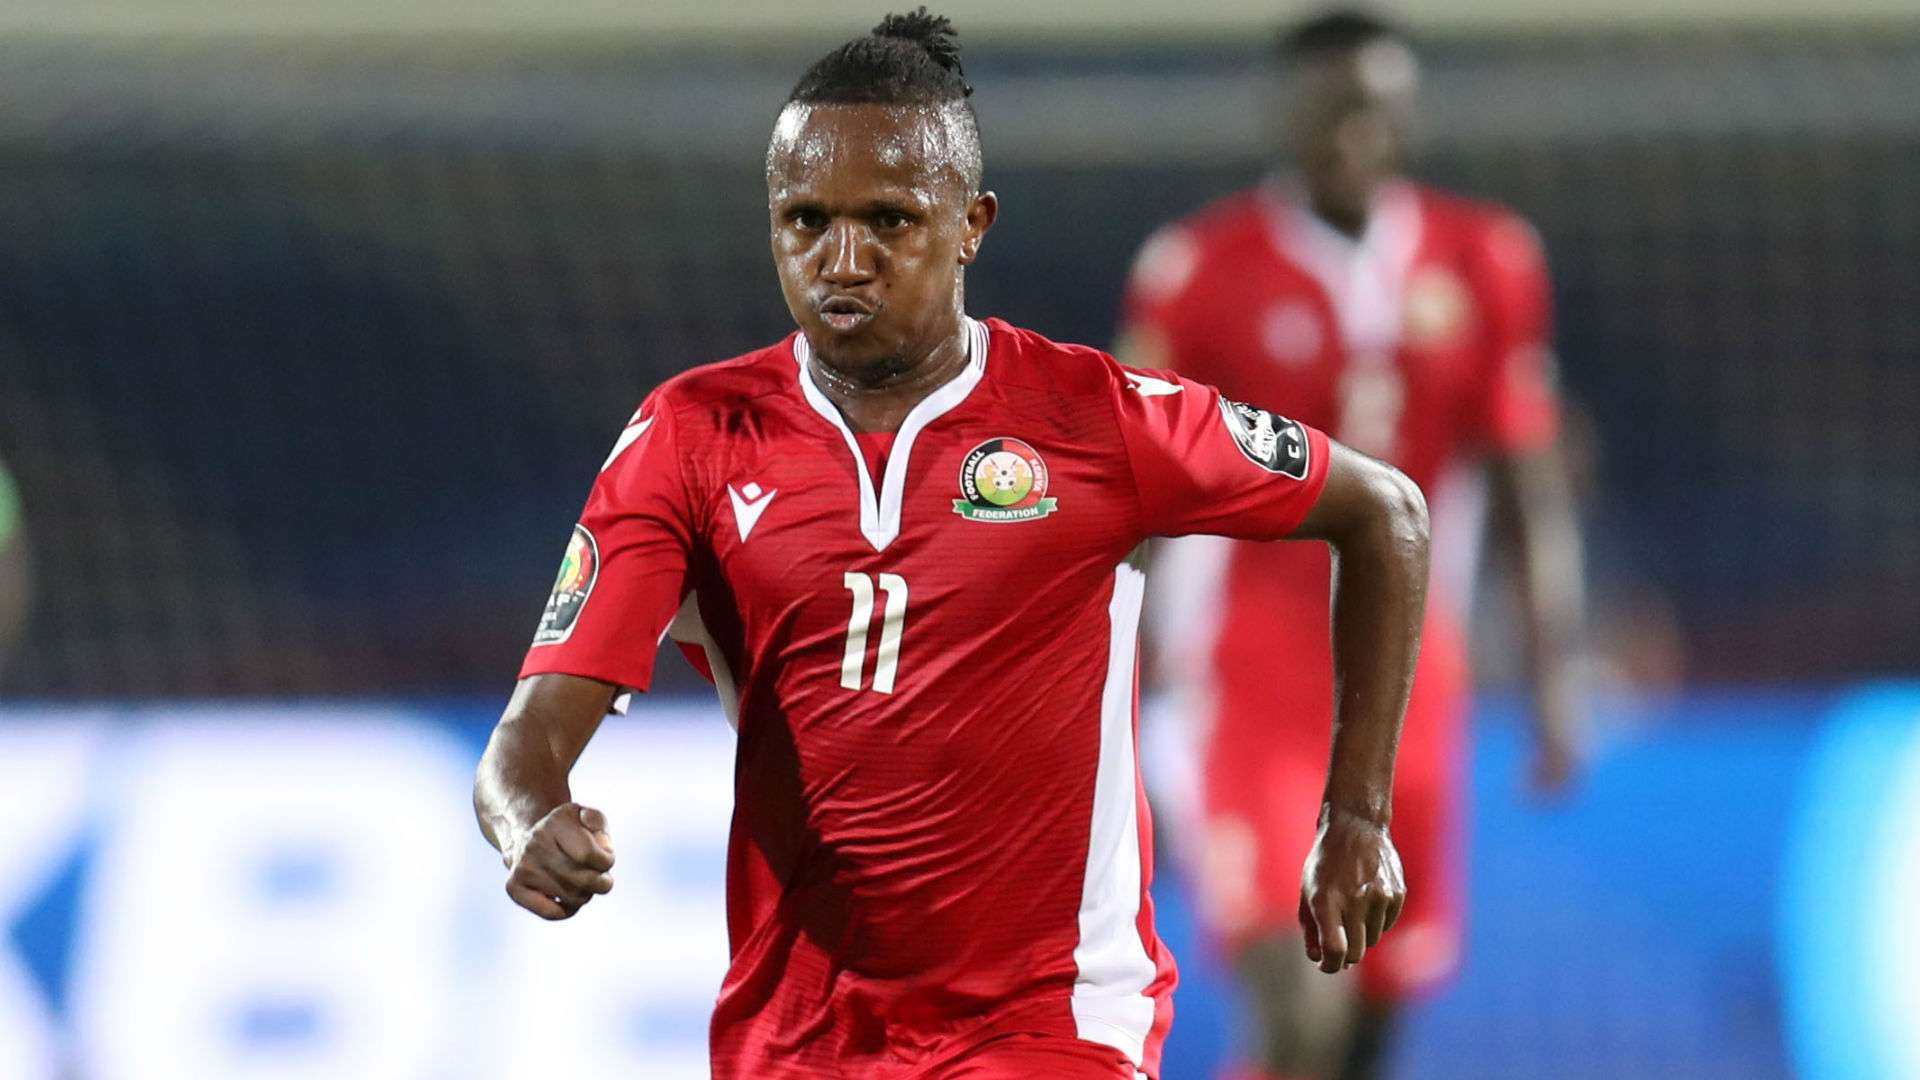 Francis Kahata of Kenya during the 2019 Africa Cup of Nations Finals.